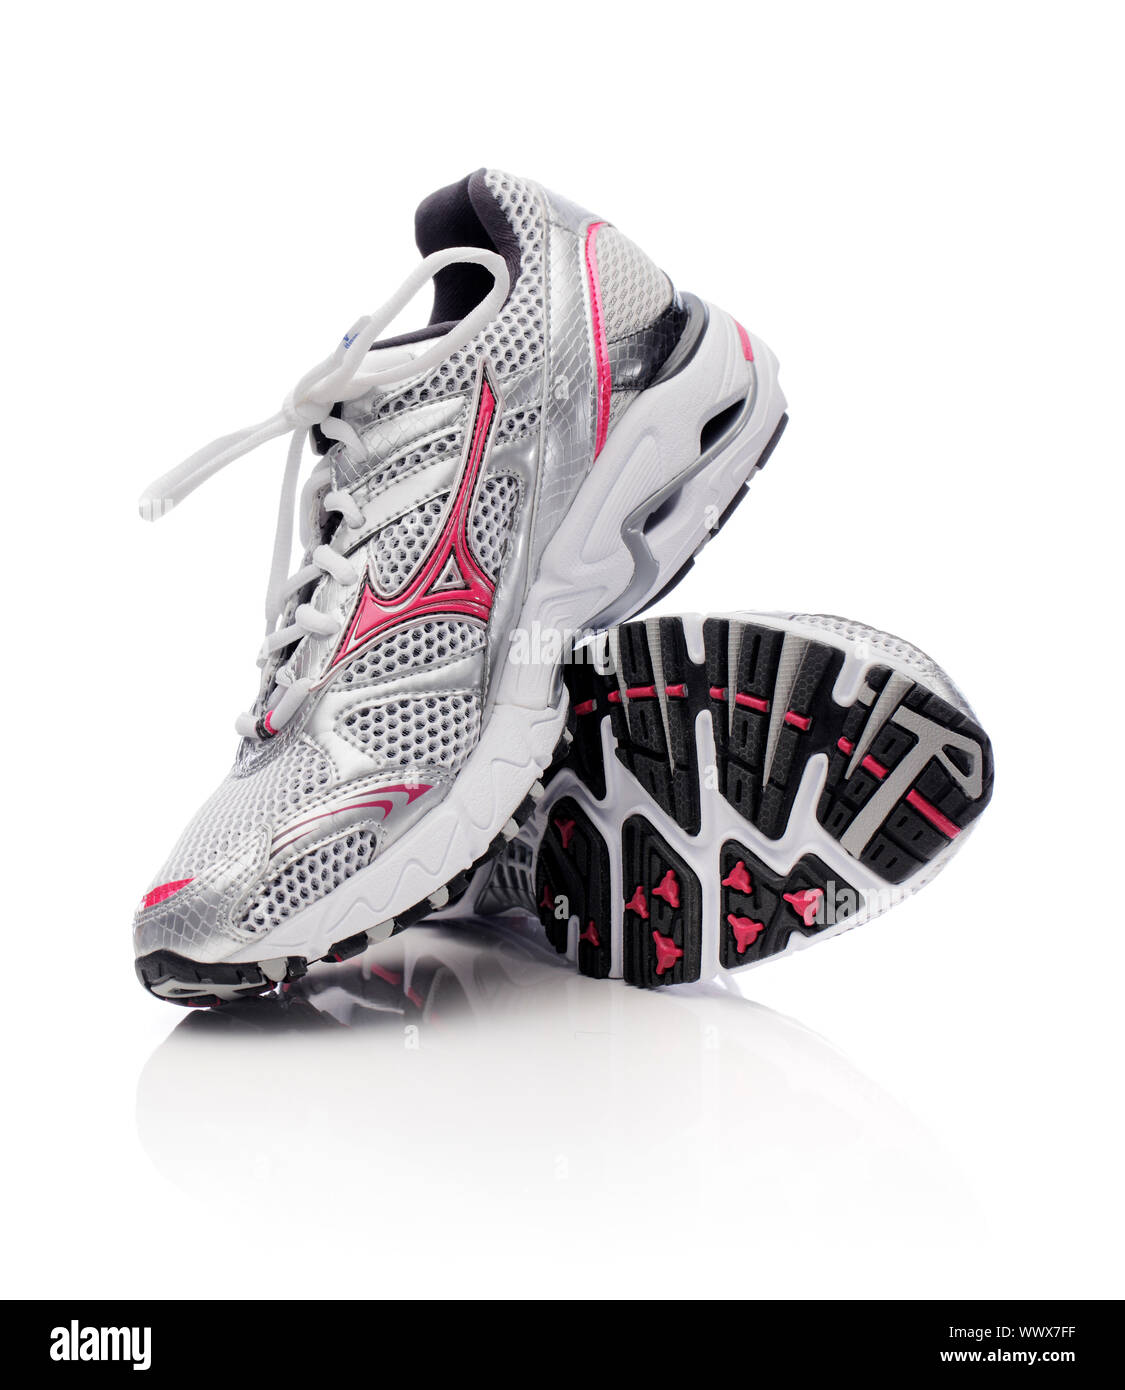 Finland - April 18, 2011: New women's Mizuno brand athletic shoes designed  for running Stock Photo - Alamy